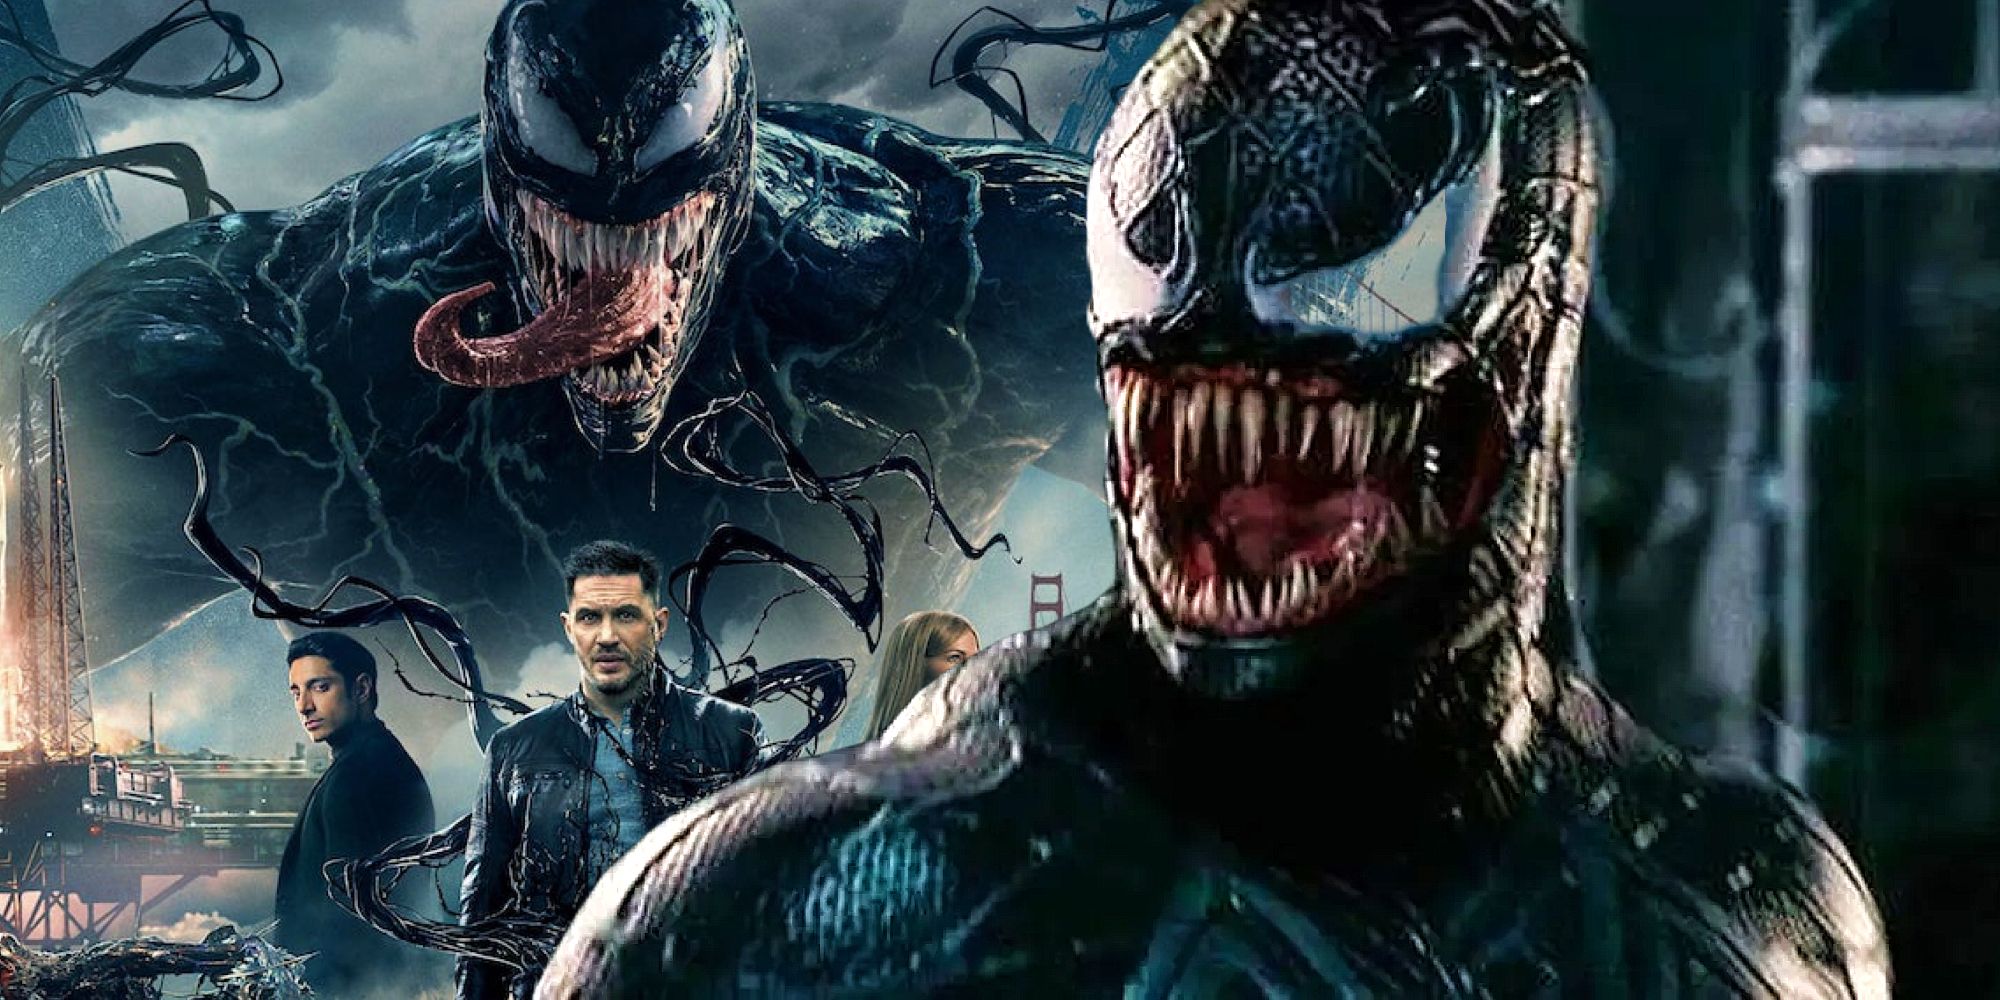 Venom baring his teeth as seen in Spider-Man 3 next to the poster for 2018's Venom starring Tom Hardy